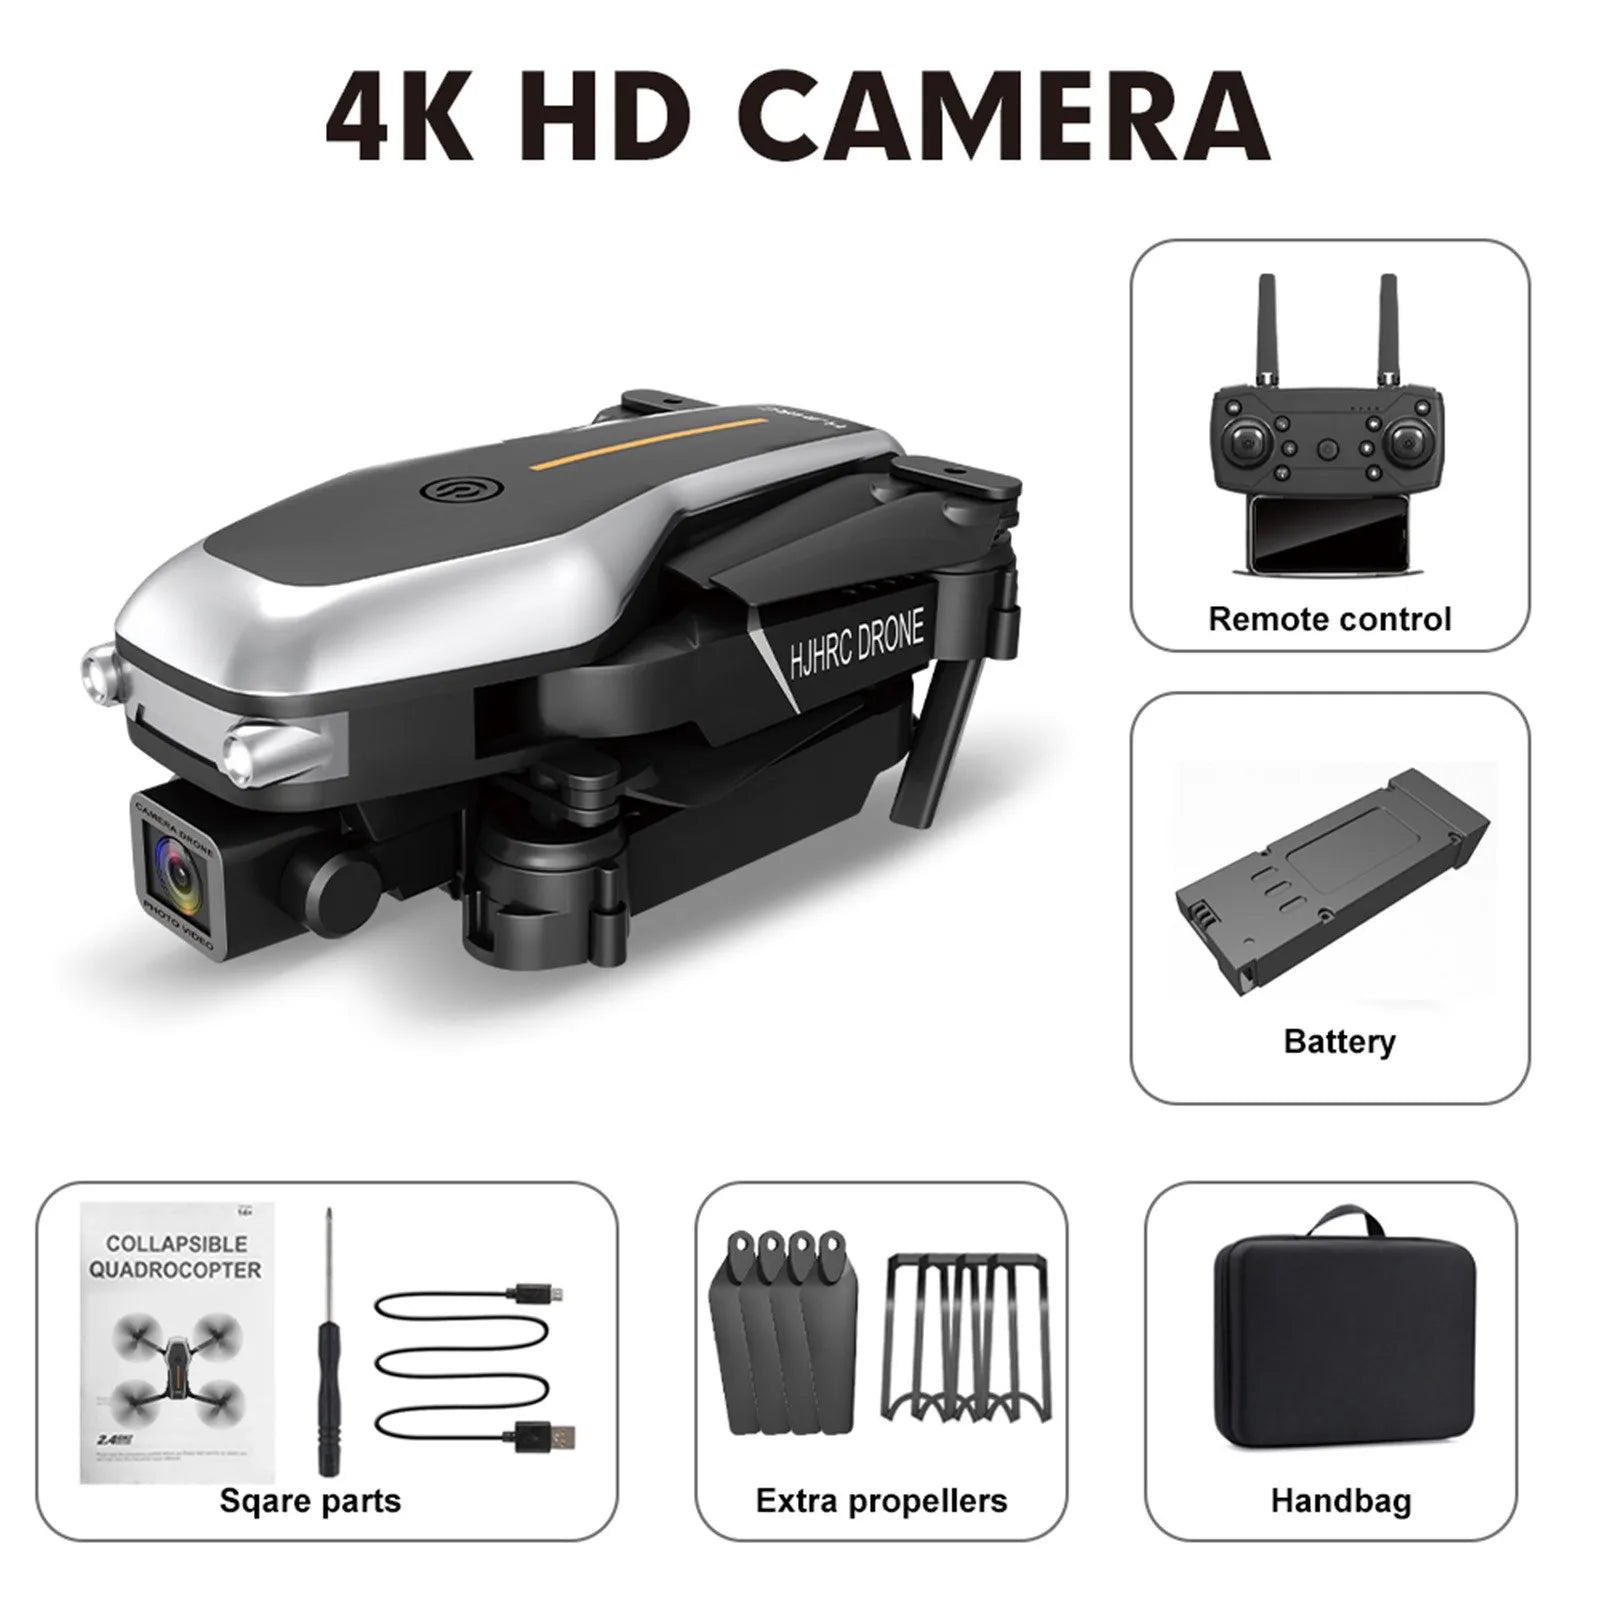 HJ95 Drone, 4k hd camera remote control battery collapsible